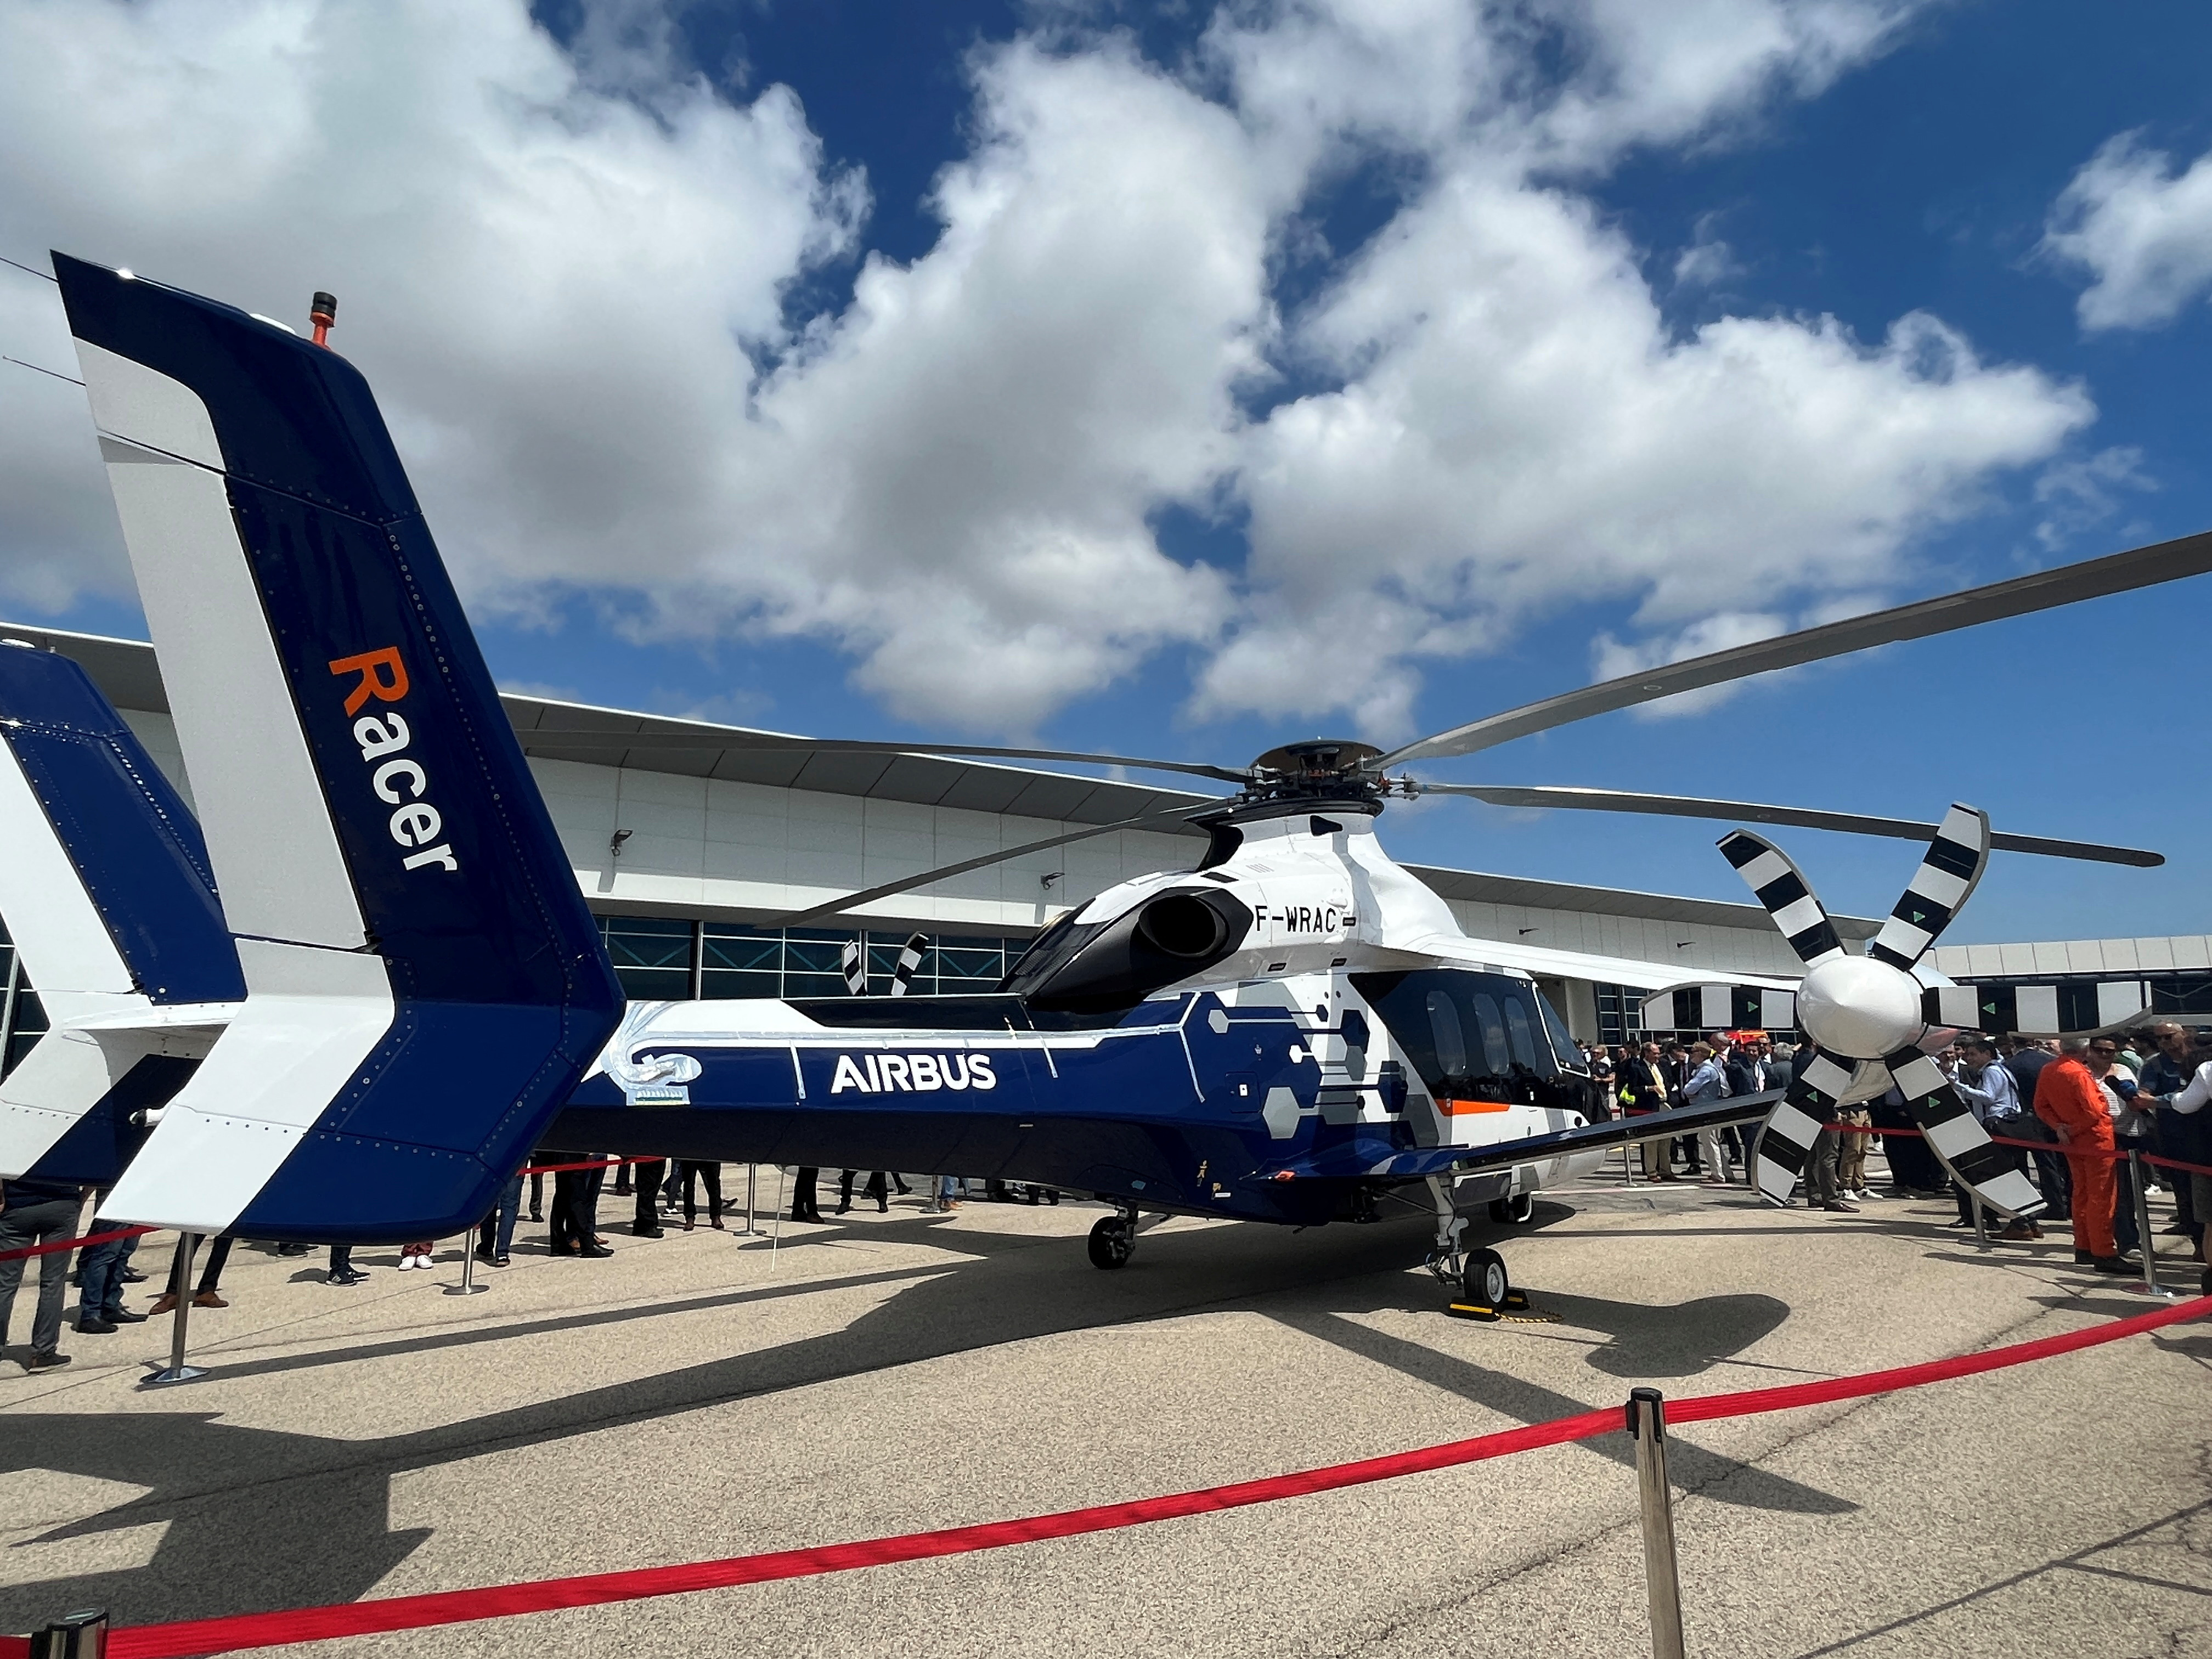 Airbus Helicopters' Racer high-speed demonstrator model seen on display at Marignane